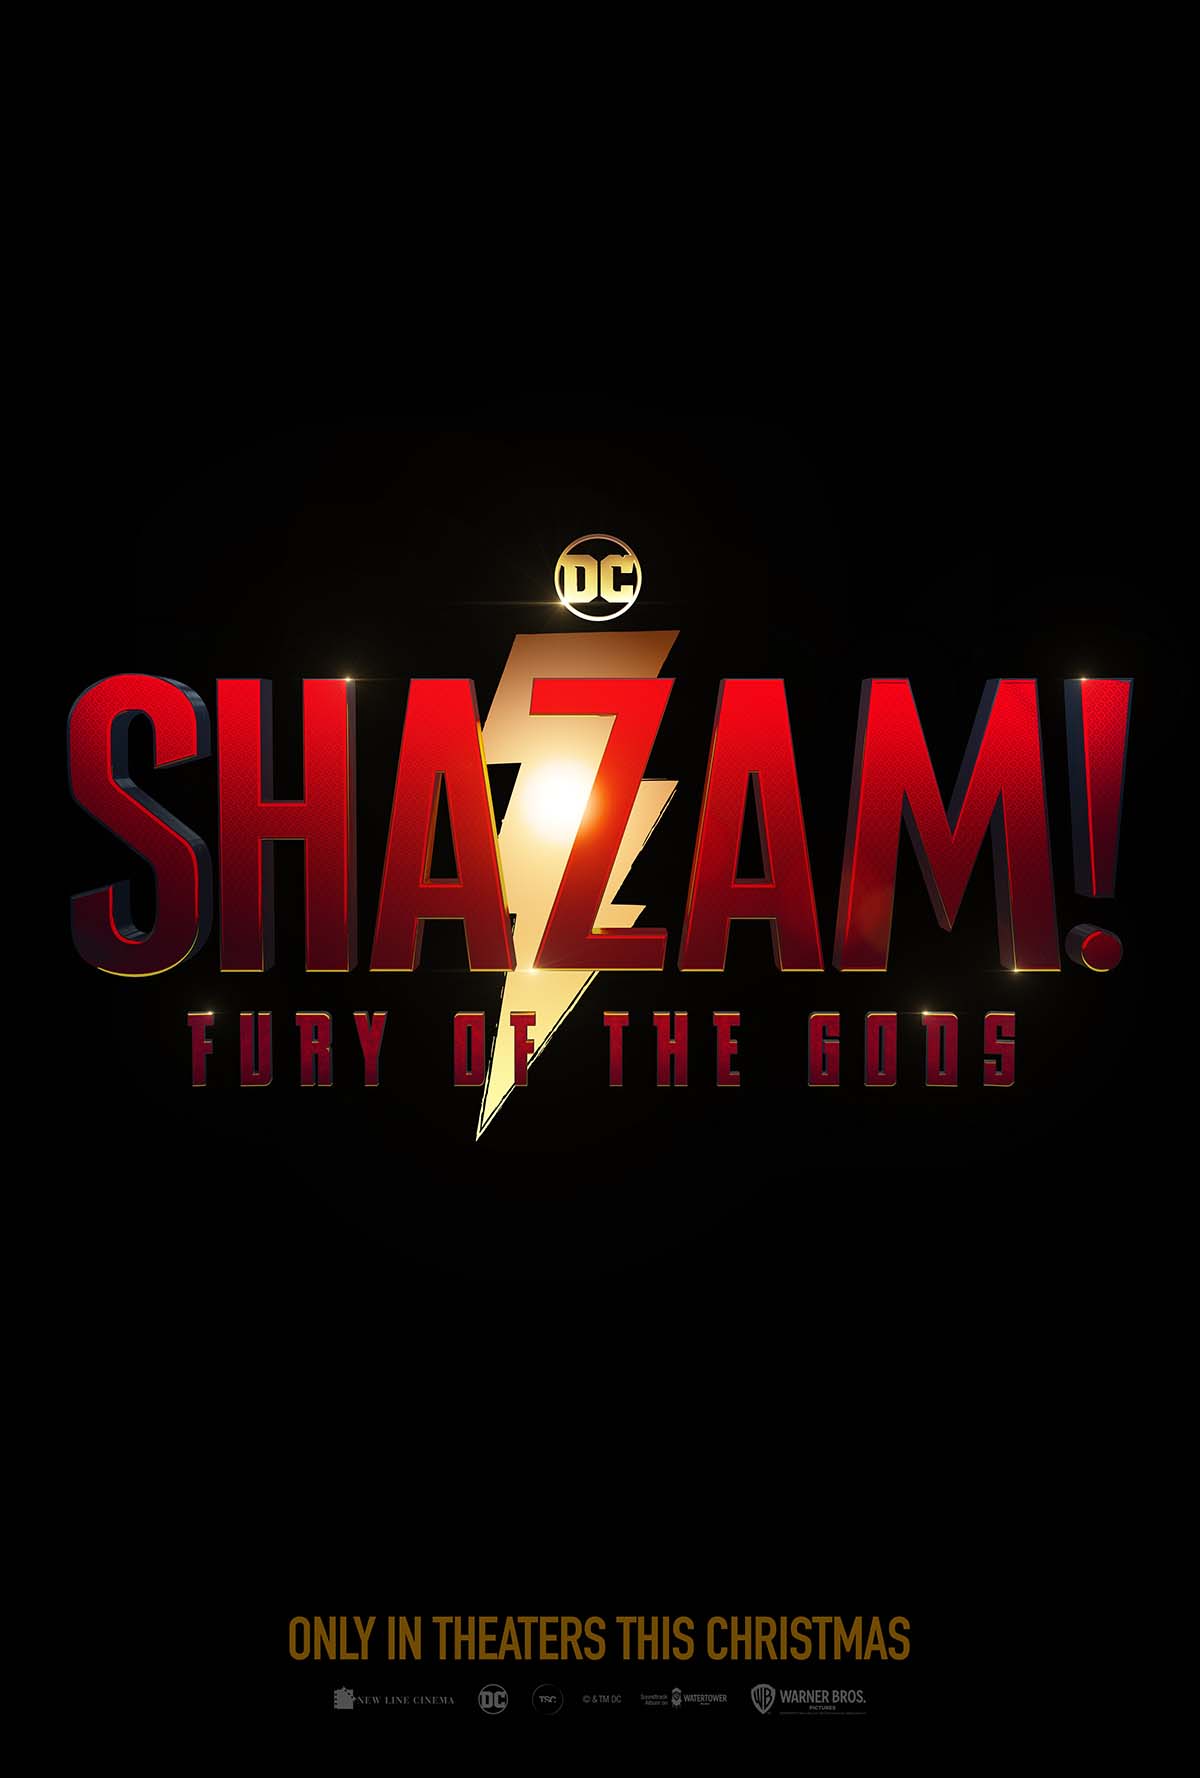 Your Guide To Shazam! Fury Of The Gods